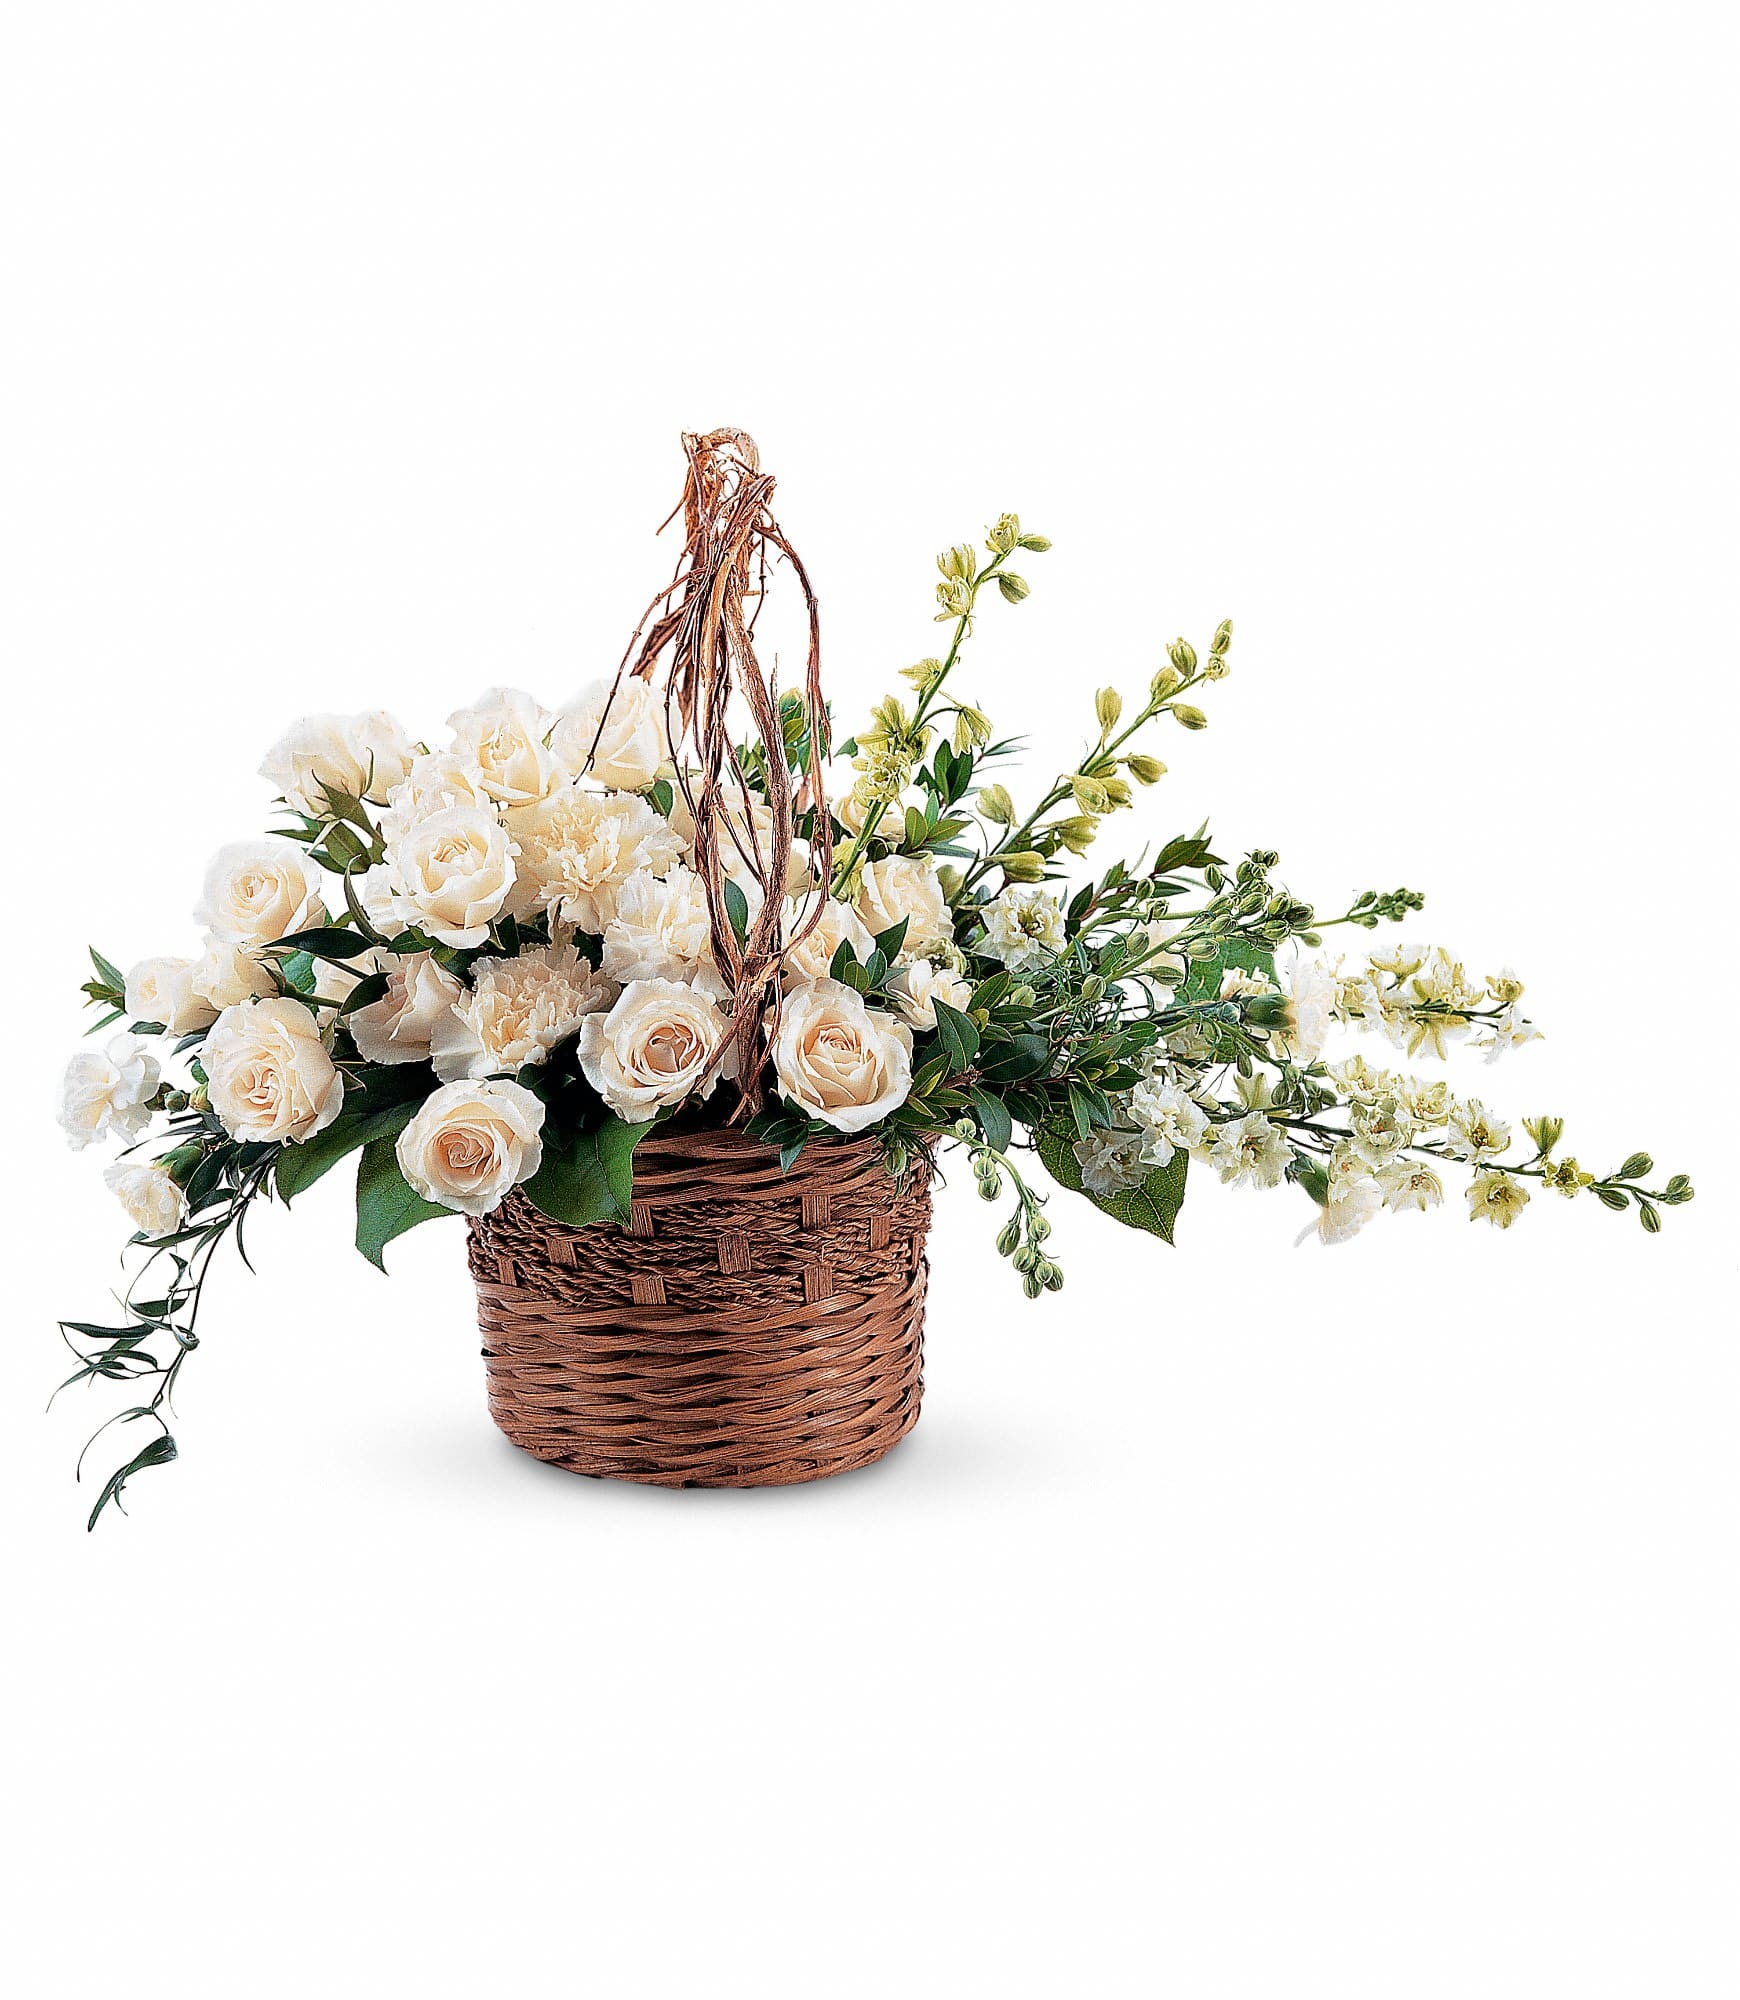 wicker basket filled with beautiful white flowers